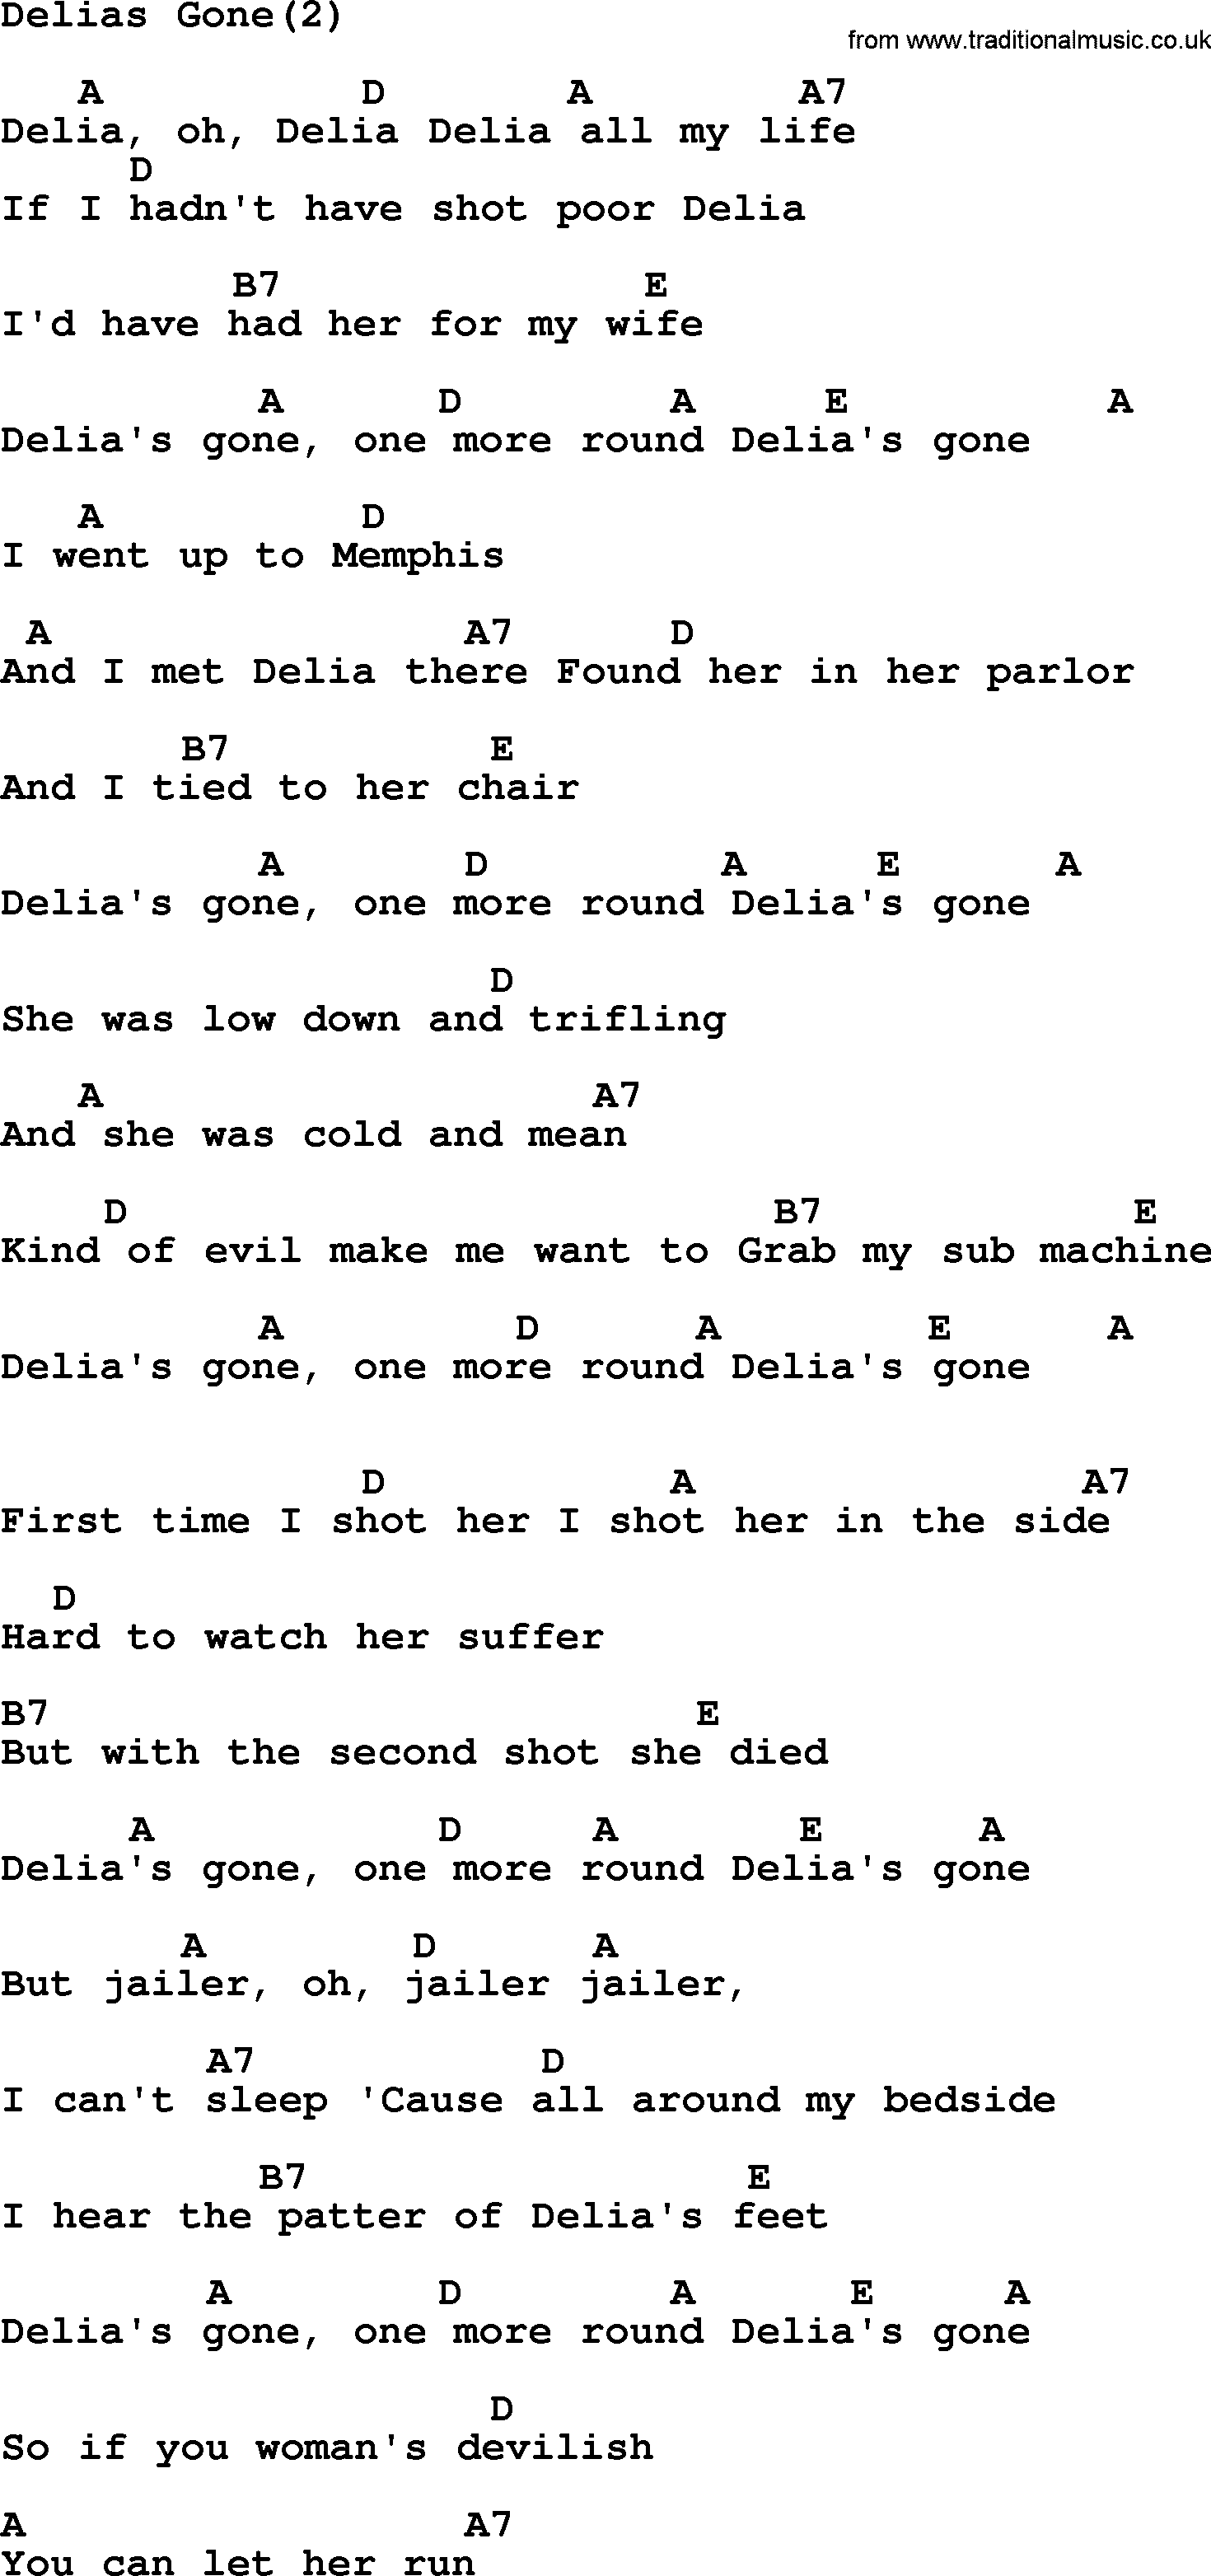 Johnny Cash song Delias Gone(2), lyrics and chords